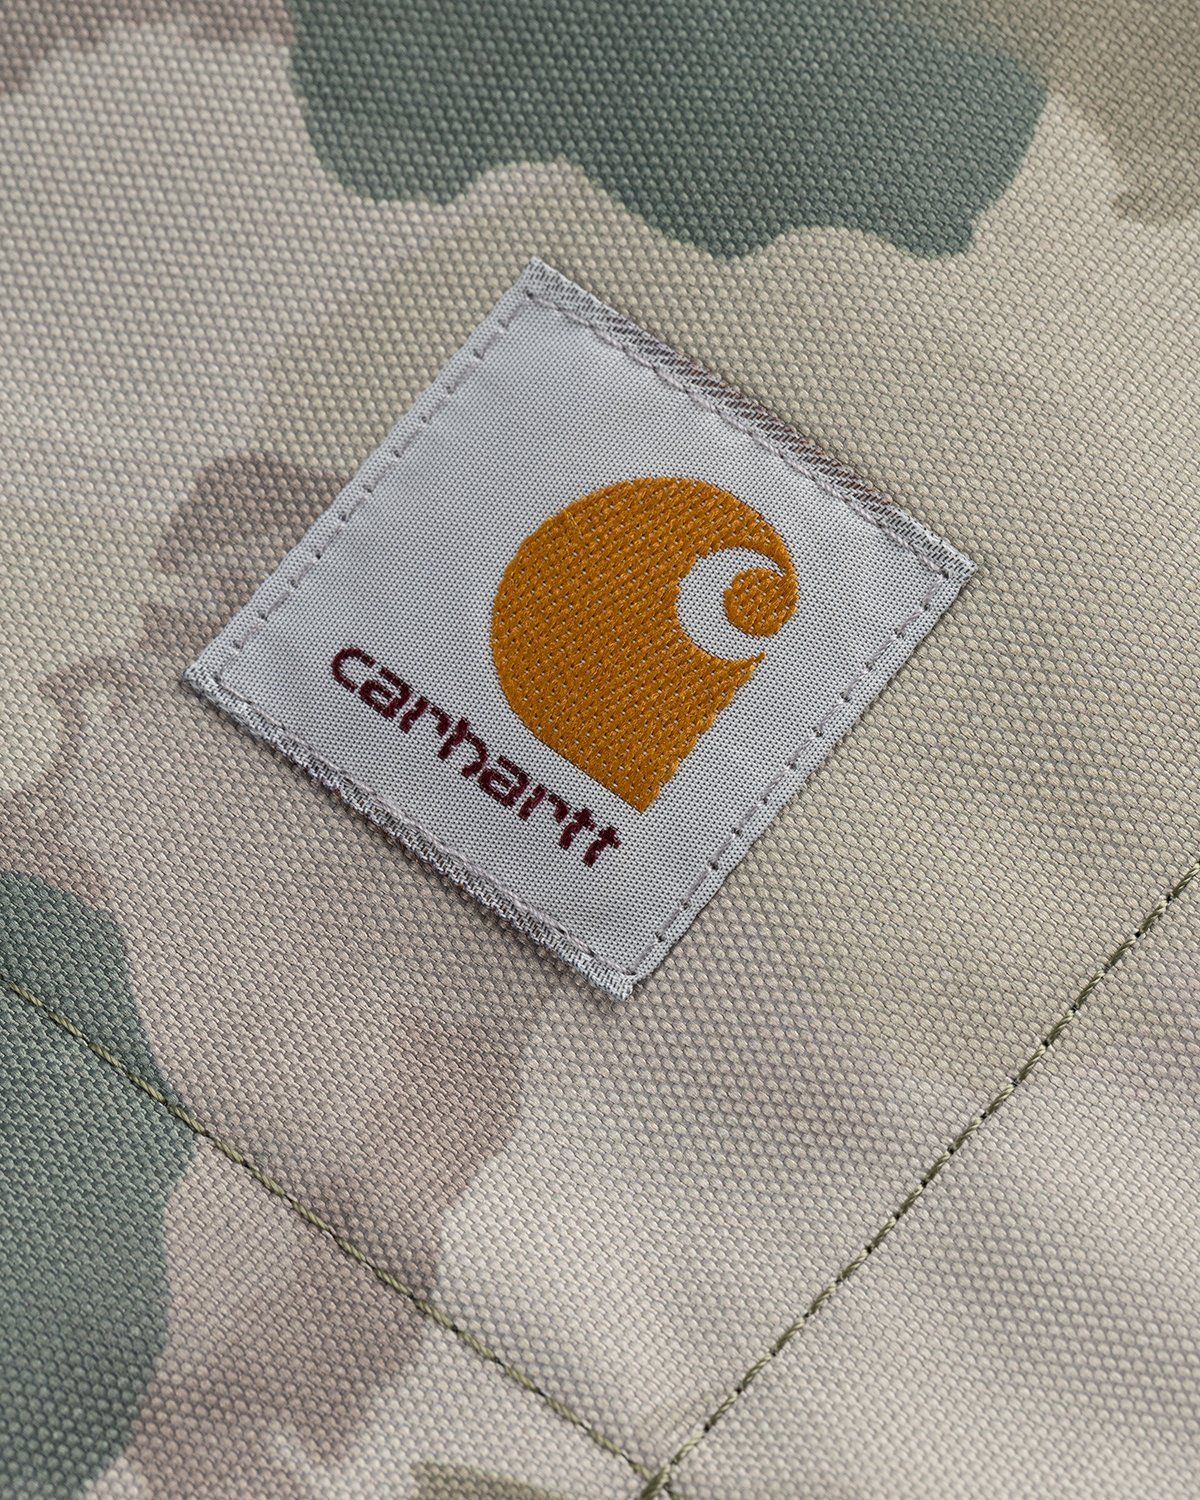 Carhartt WIP – Picnic Blanket Camo Tide Thyme - Lifestyle - Green - Image 5